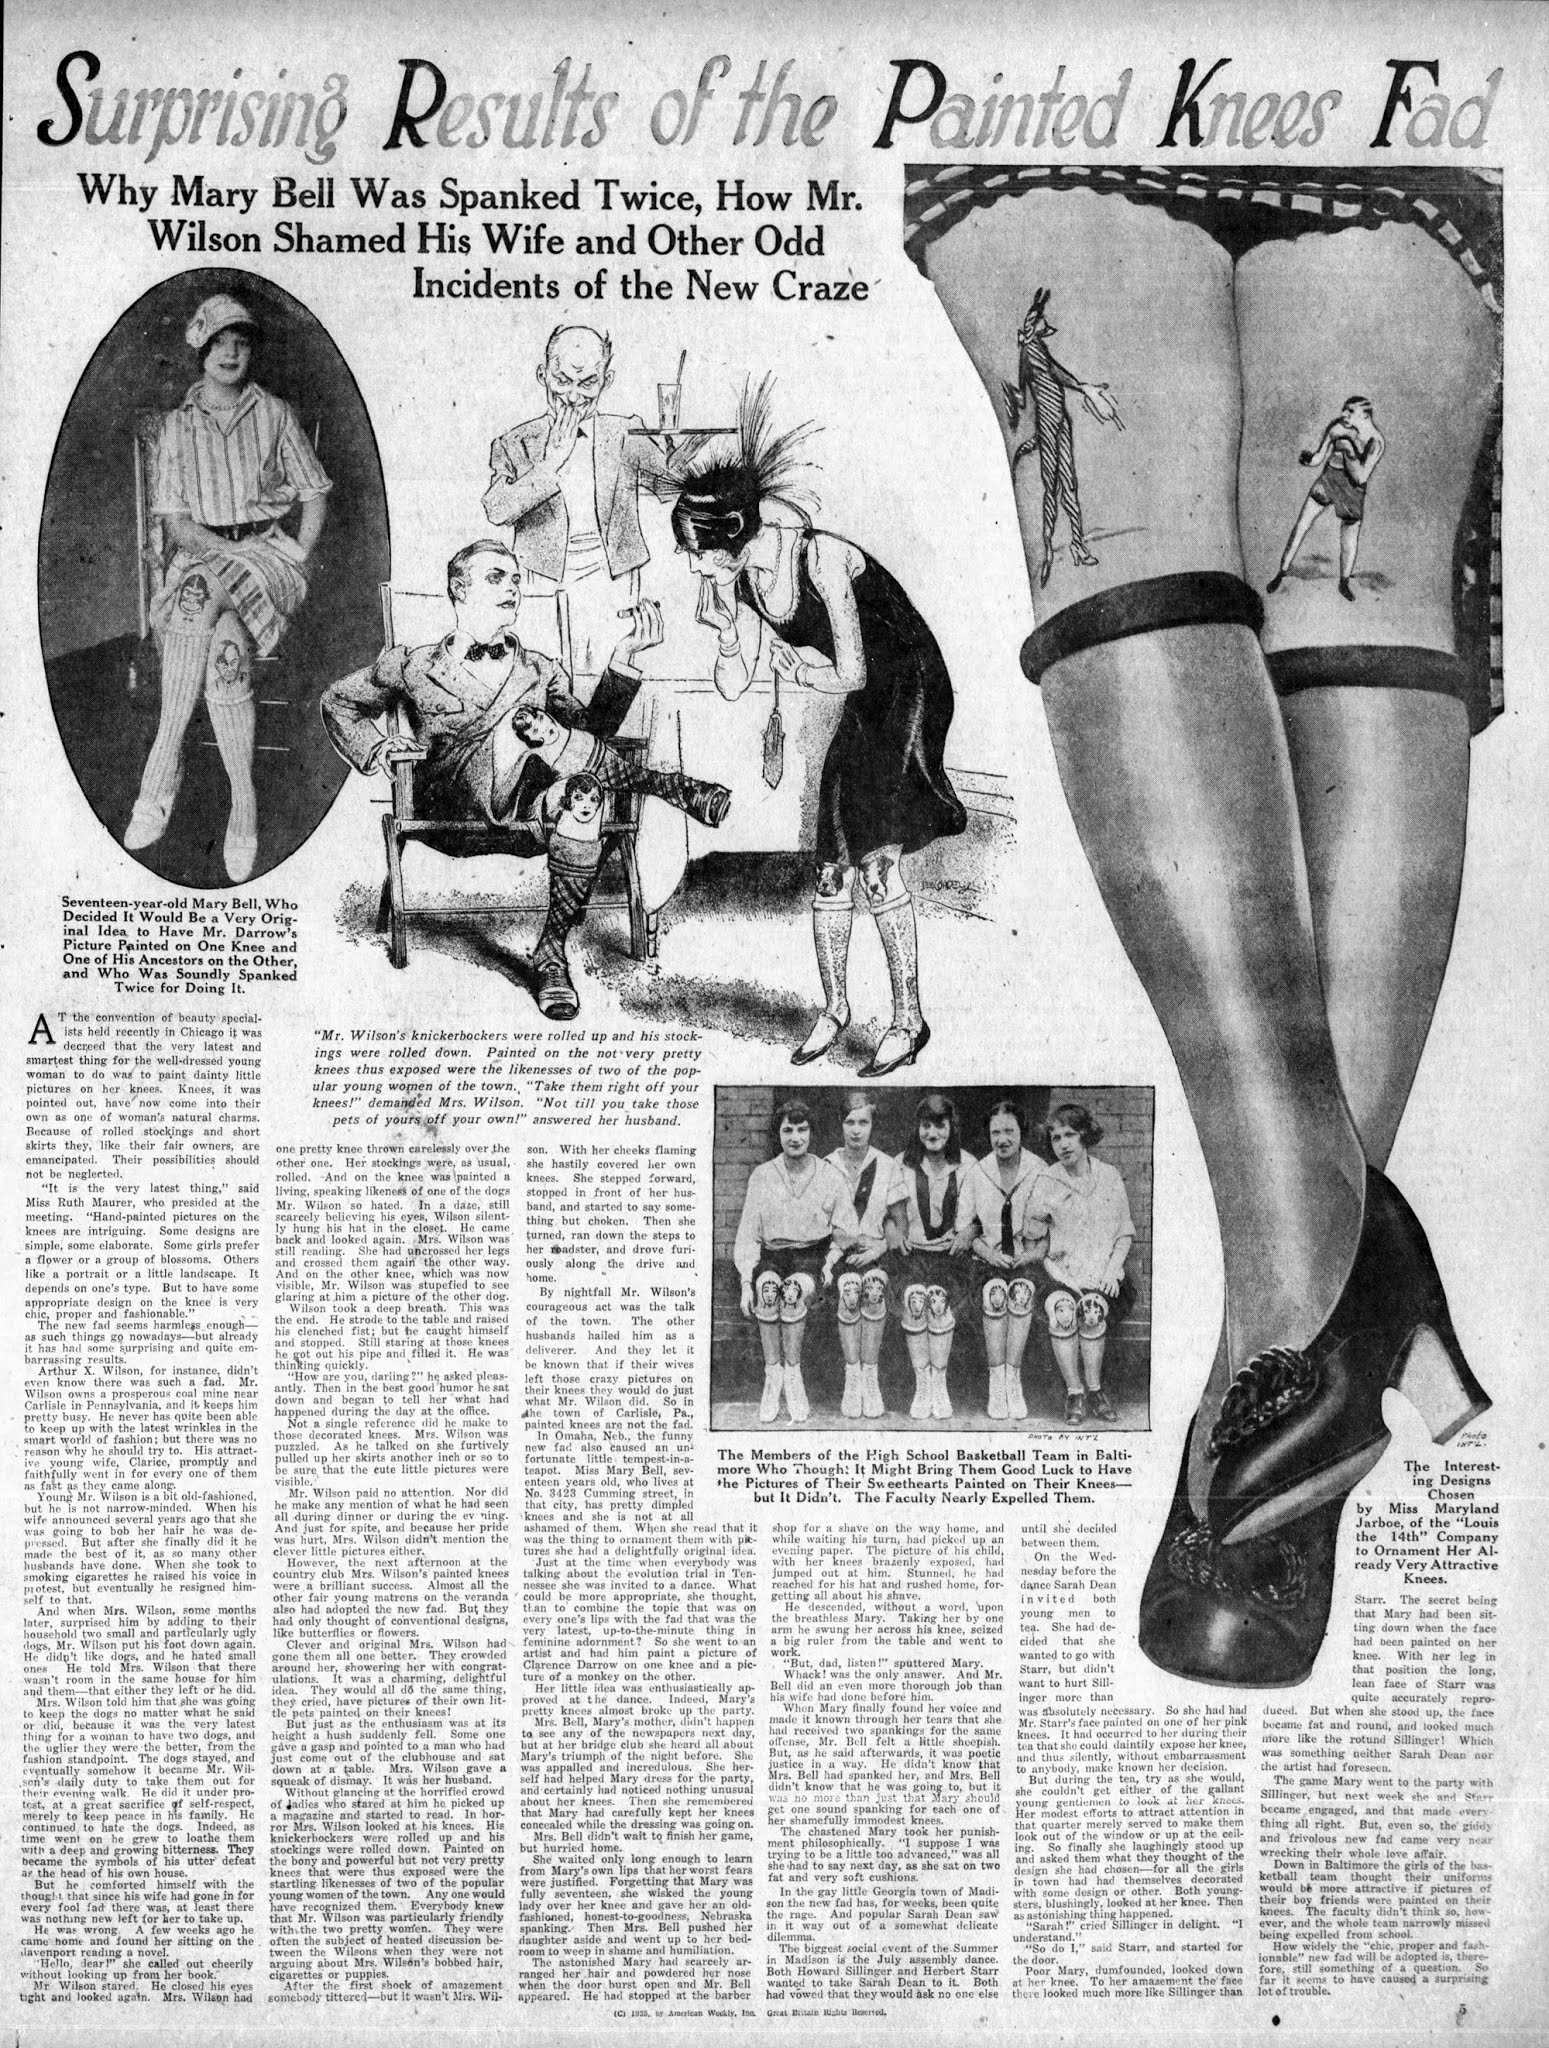 Hand-Painted Knees 1920s Trend You Probably Never Heard Of ~ Vintage Everyday image photo